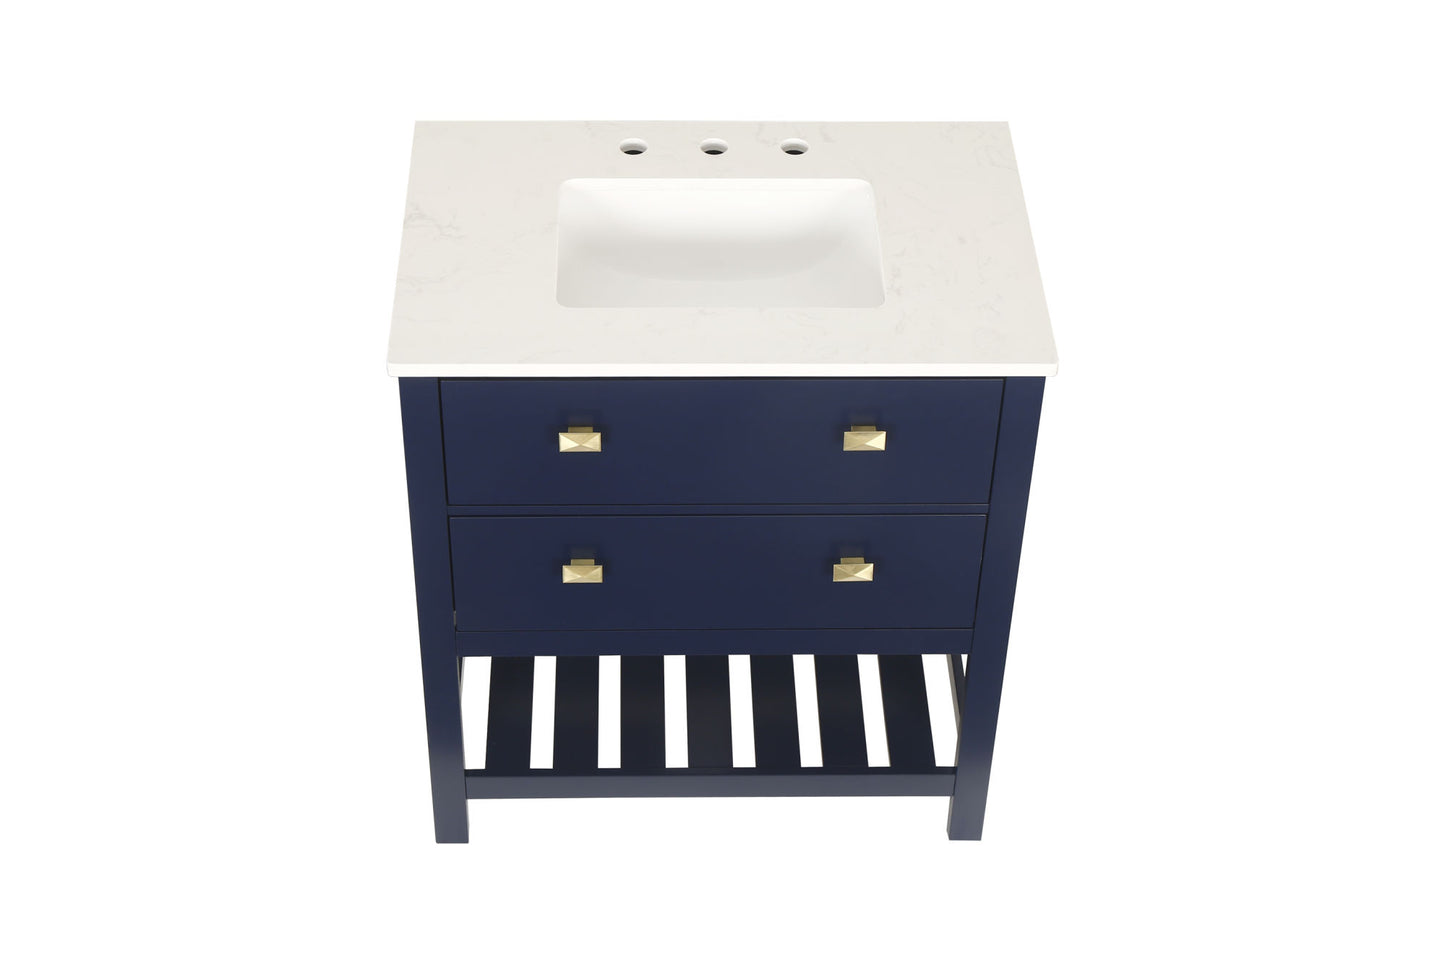 Vanity Sink Combo featuring a Marble Countertop, Bathroom Sink Cabinet, and Home Decor Bathroom Vanities - Fully Assembled Blue 30-inch Vanity with Sink 23V01-30NB